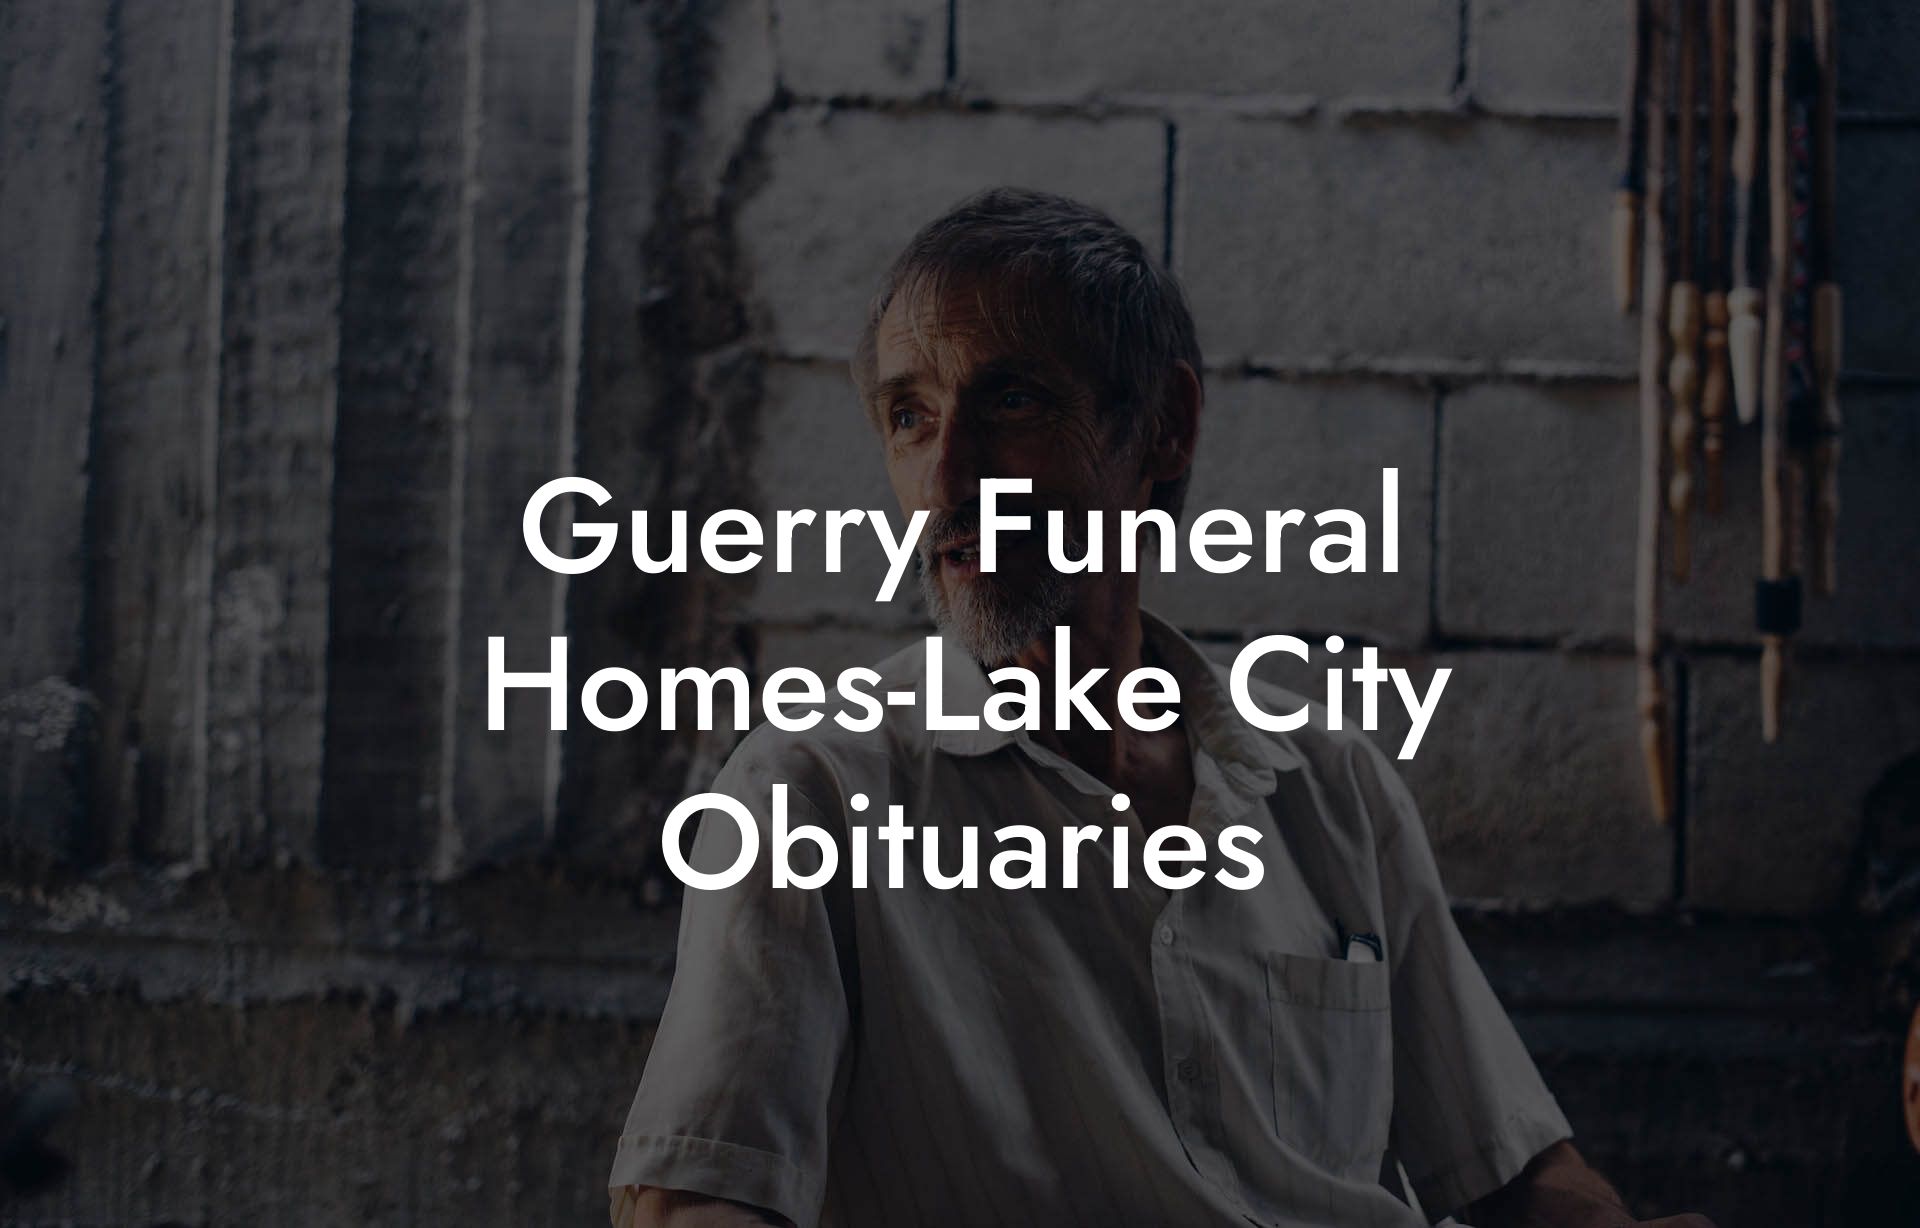 Guerry Funeral Homes-Lake City Obituaries